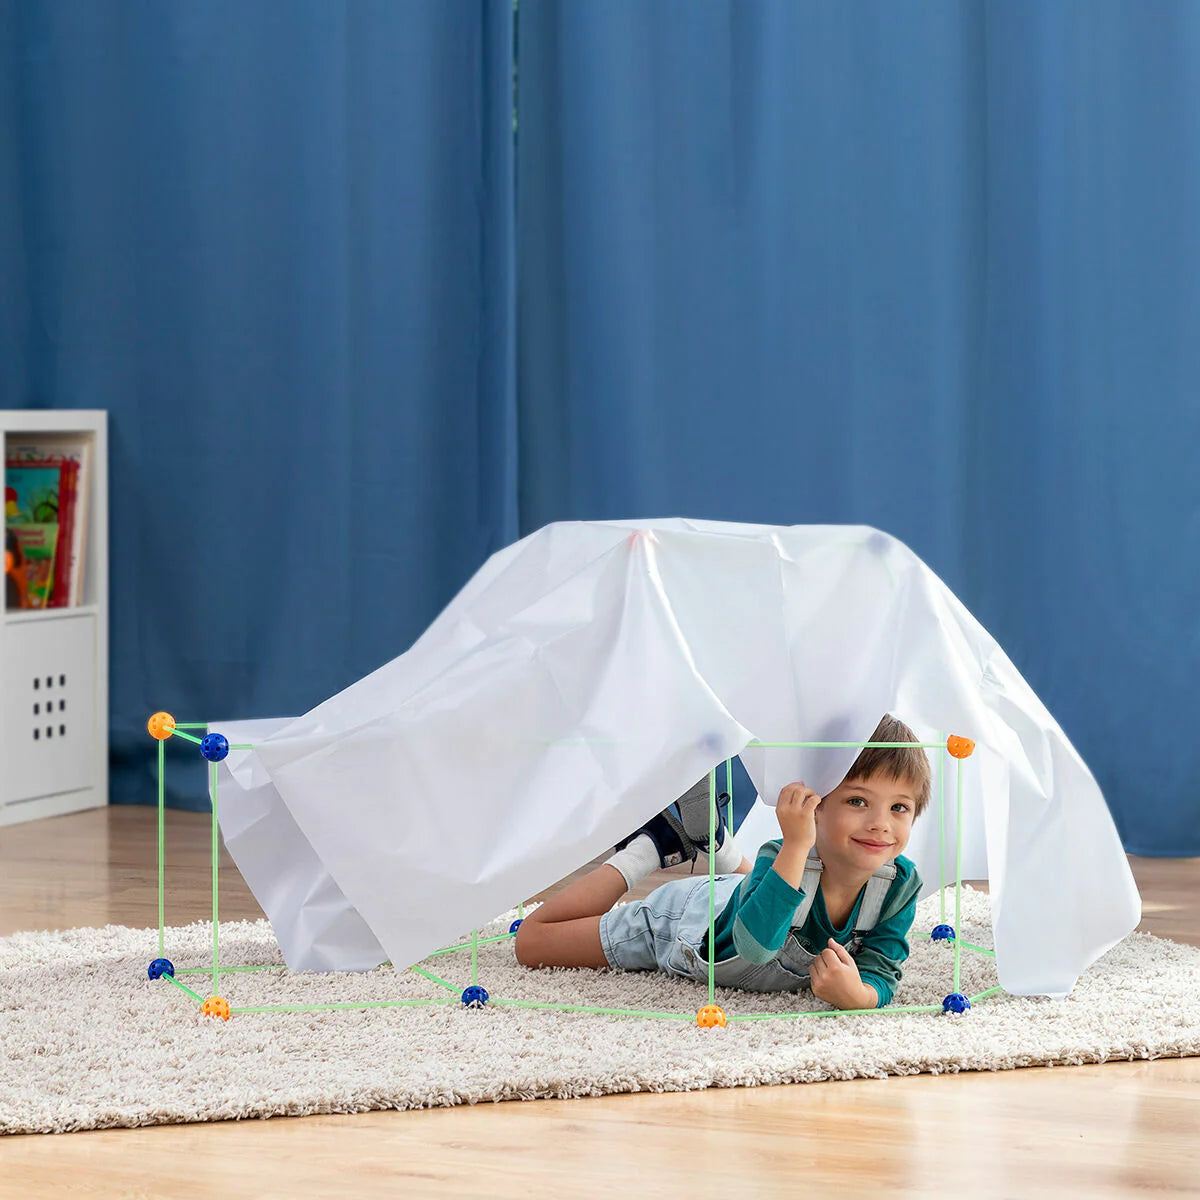 Build Your Own Fort - Building Kit